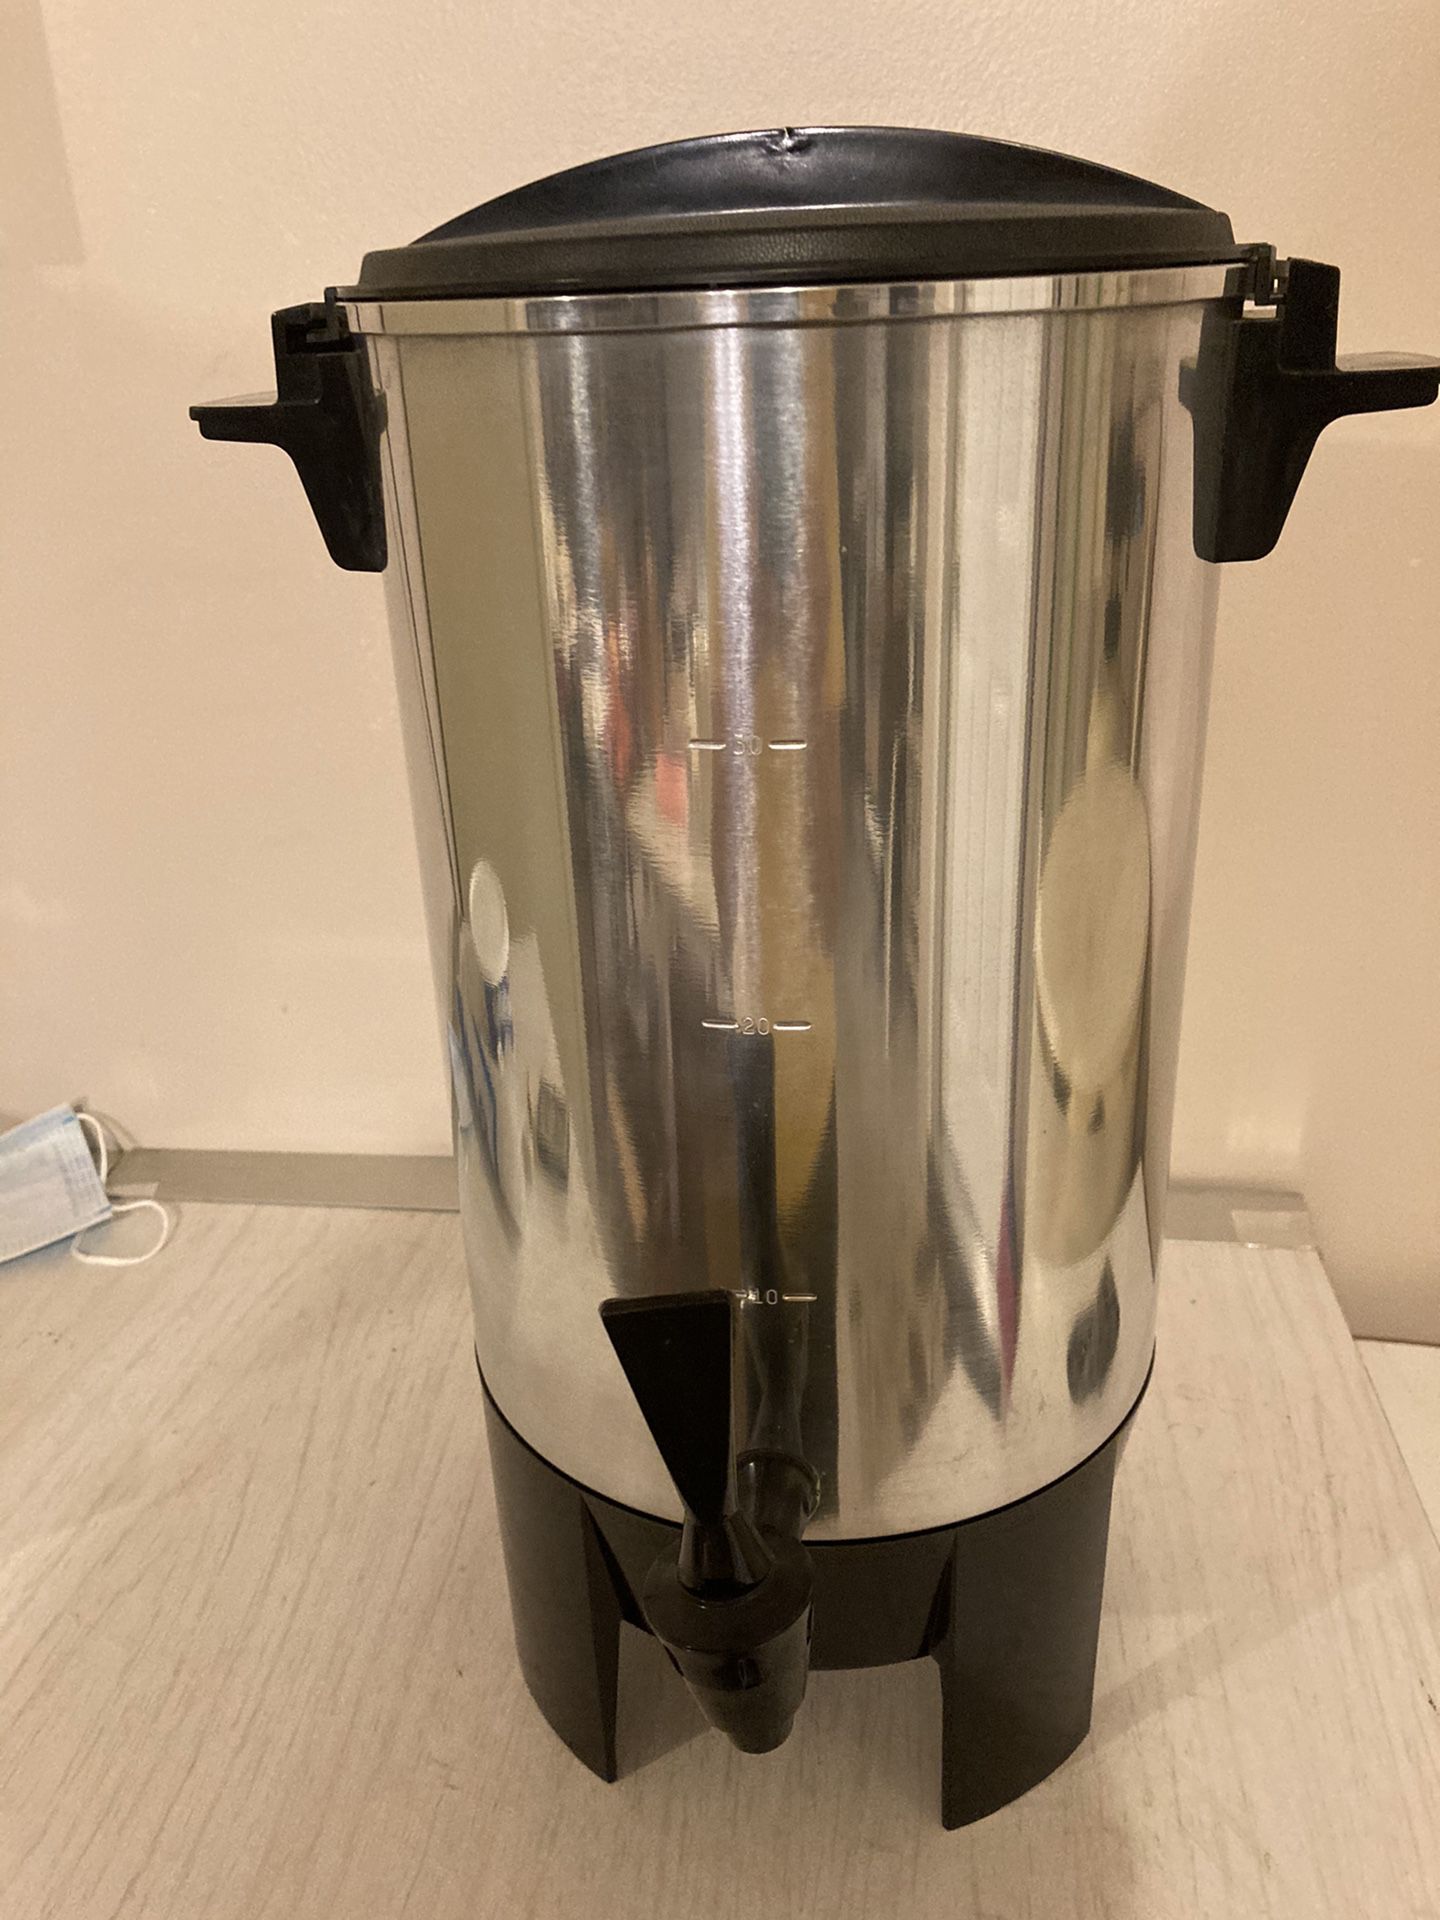 Large electric coffee maker